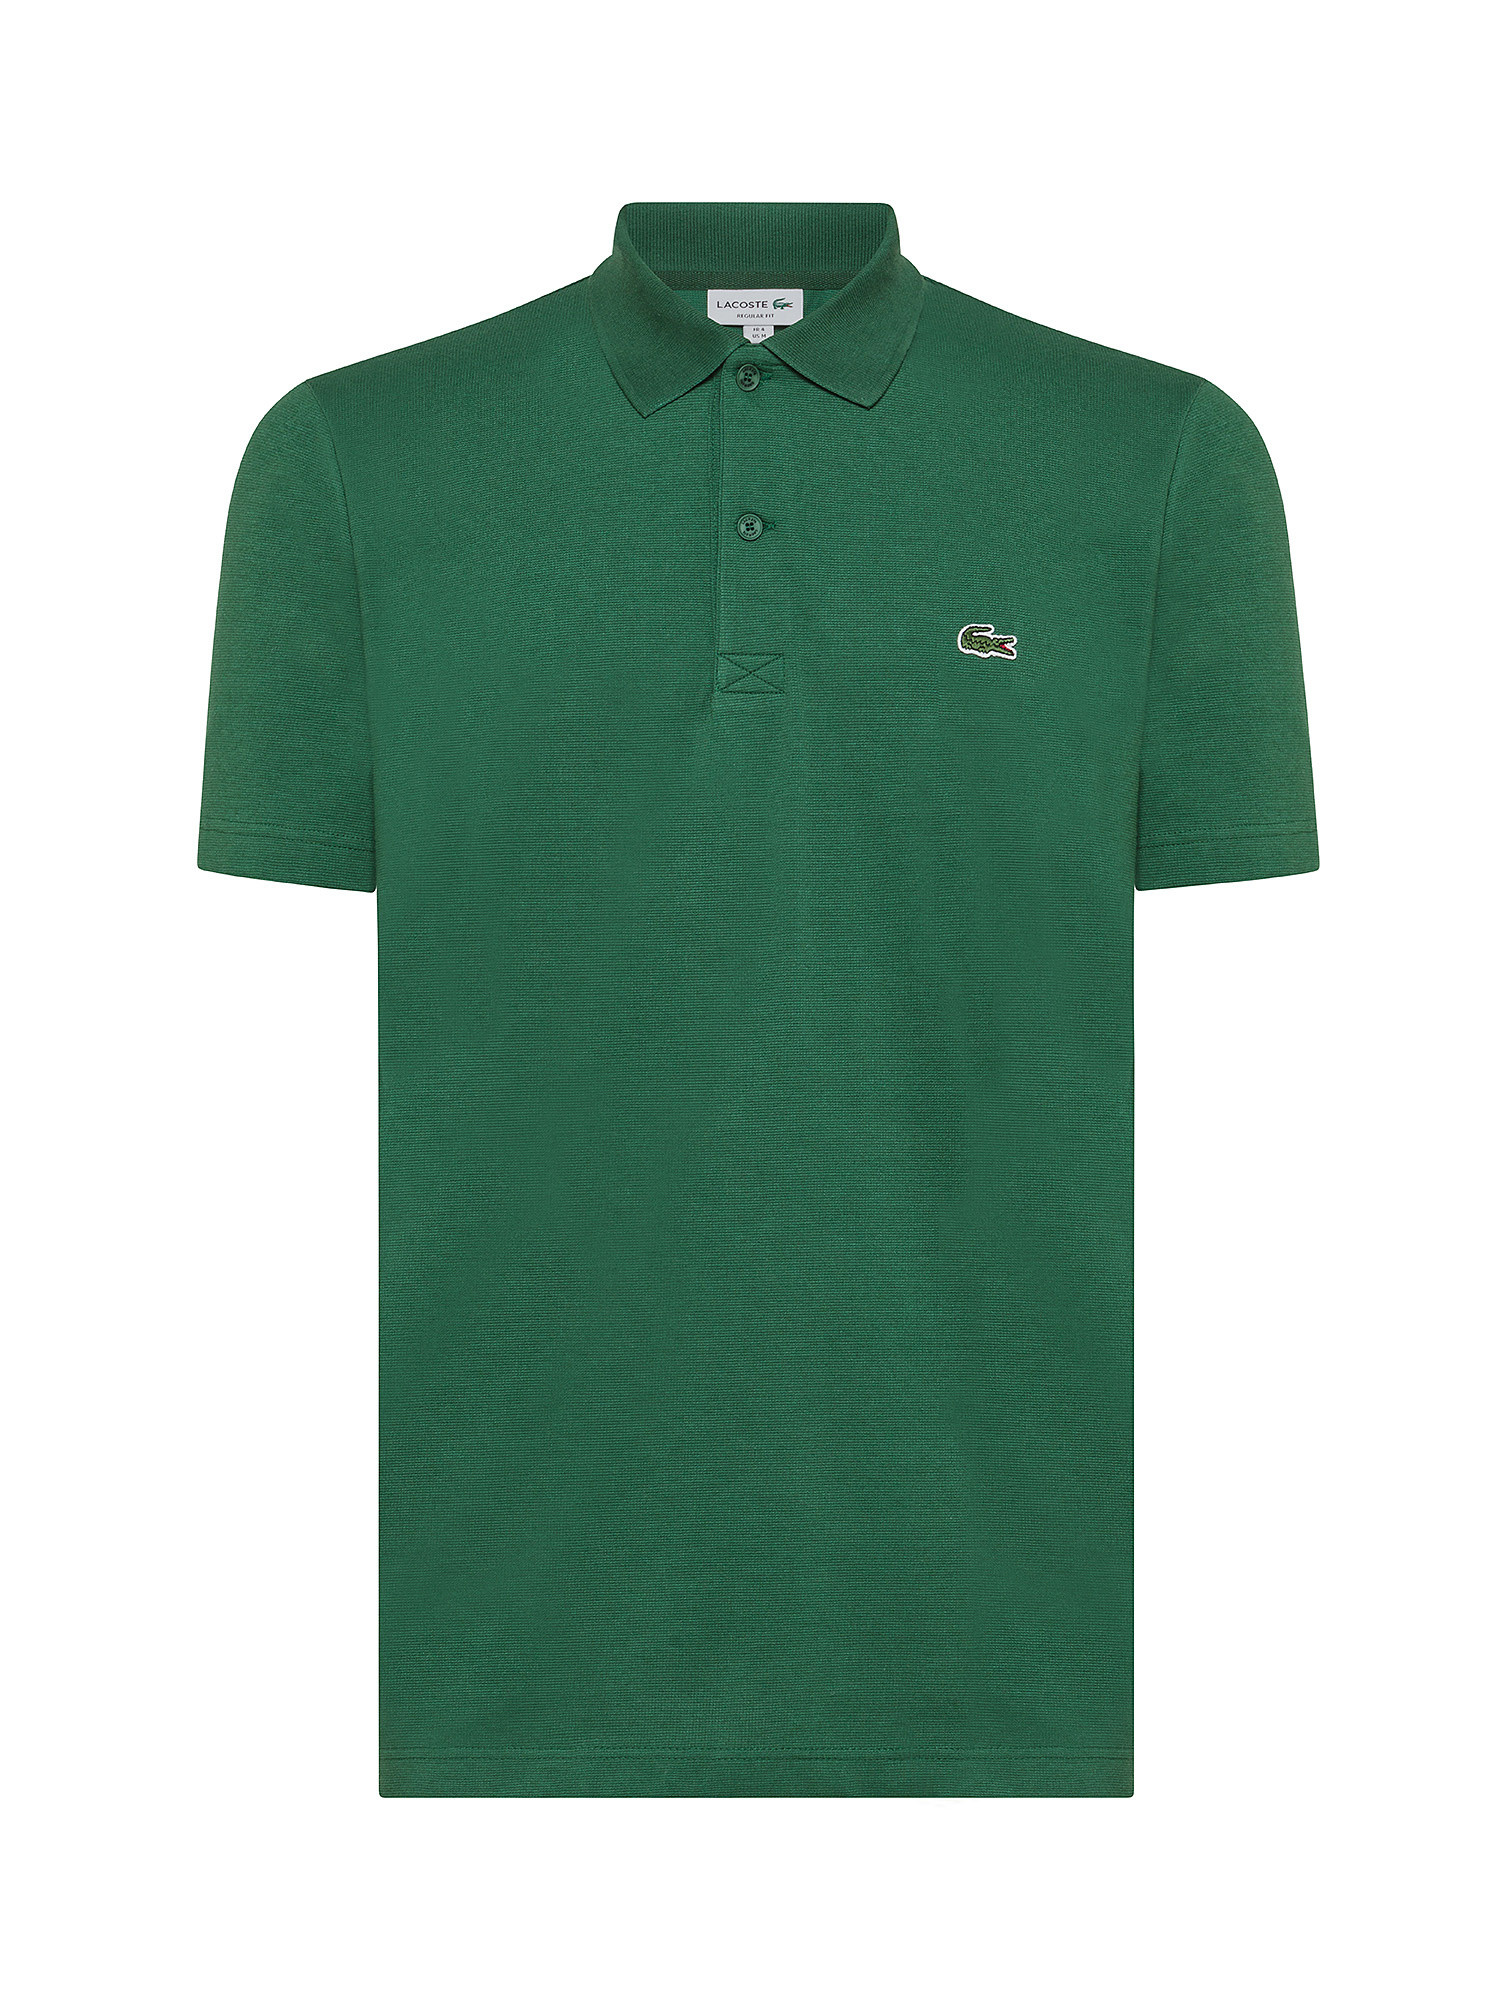 Lacoste - Polo stretch regular fit, Verde, large image number 0